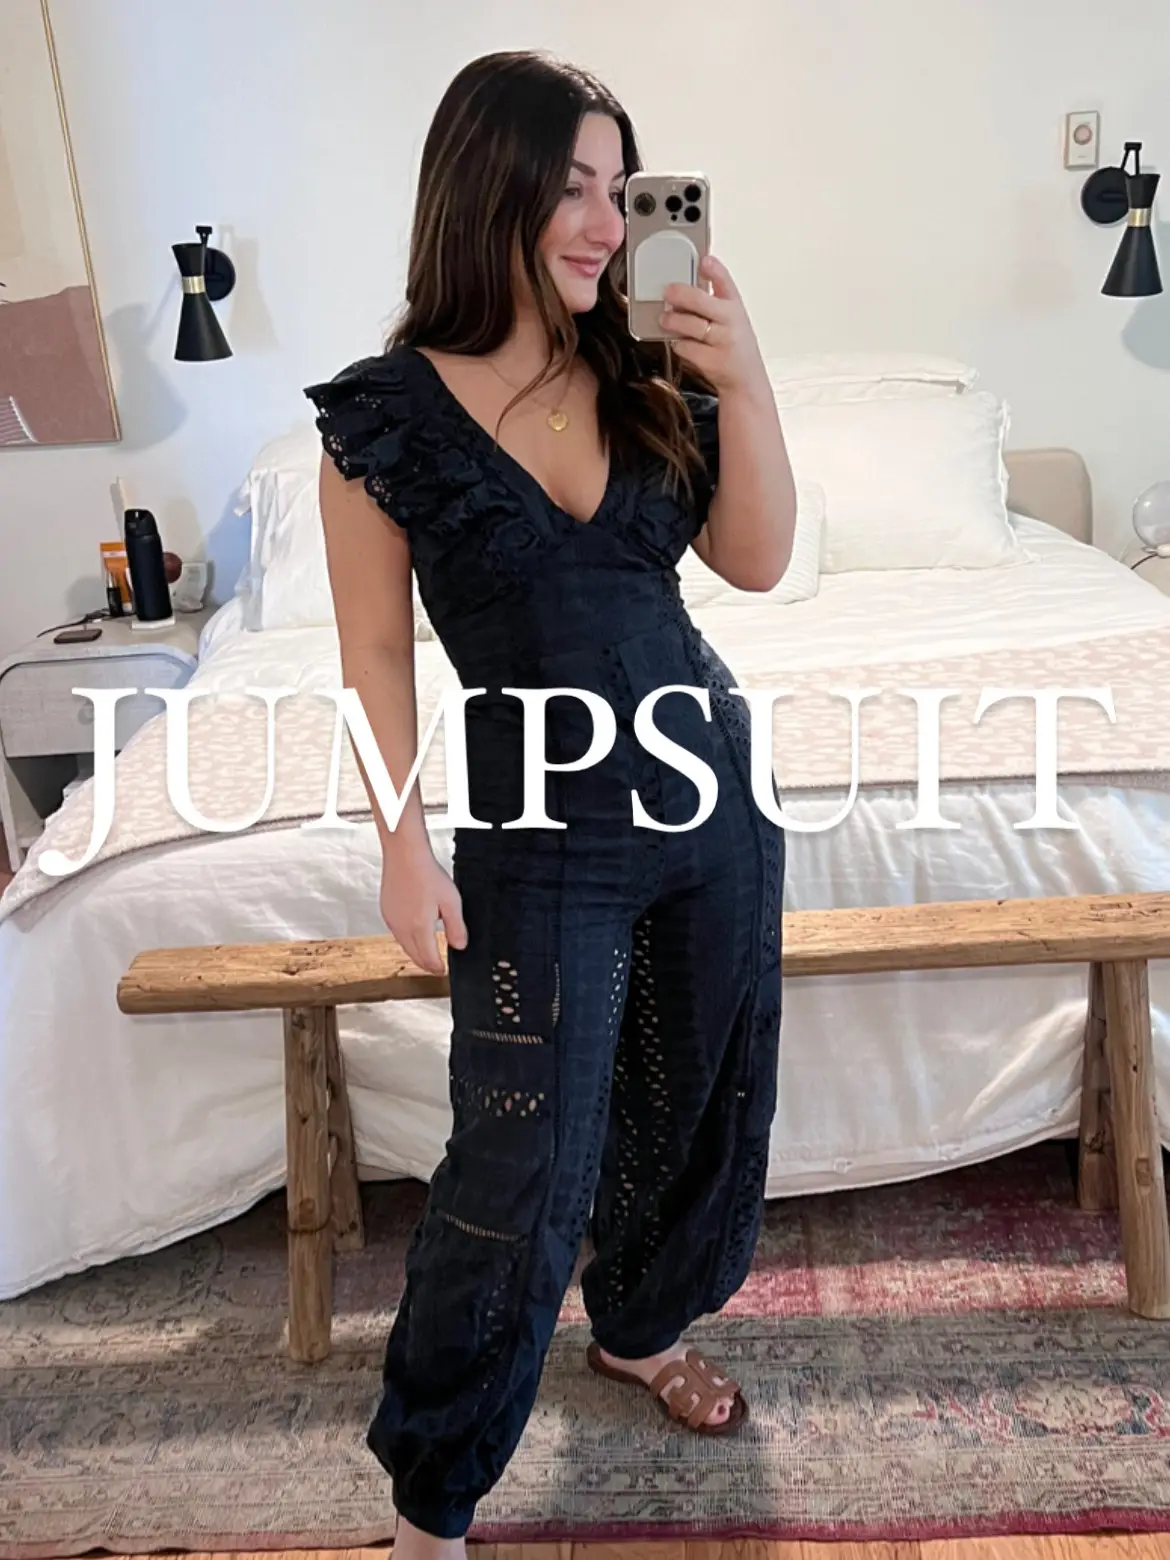 spanx just launched a new jumpsuit called “The Perfect Jumpsuit” and I  could not think of a more fitting name! This jumpsuit is soft